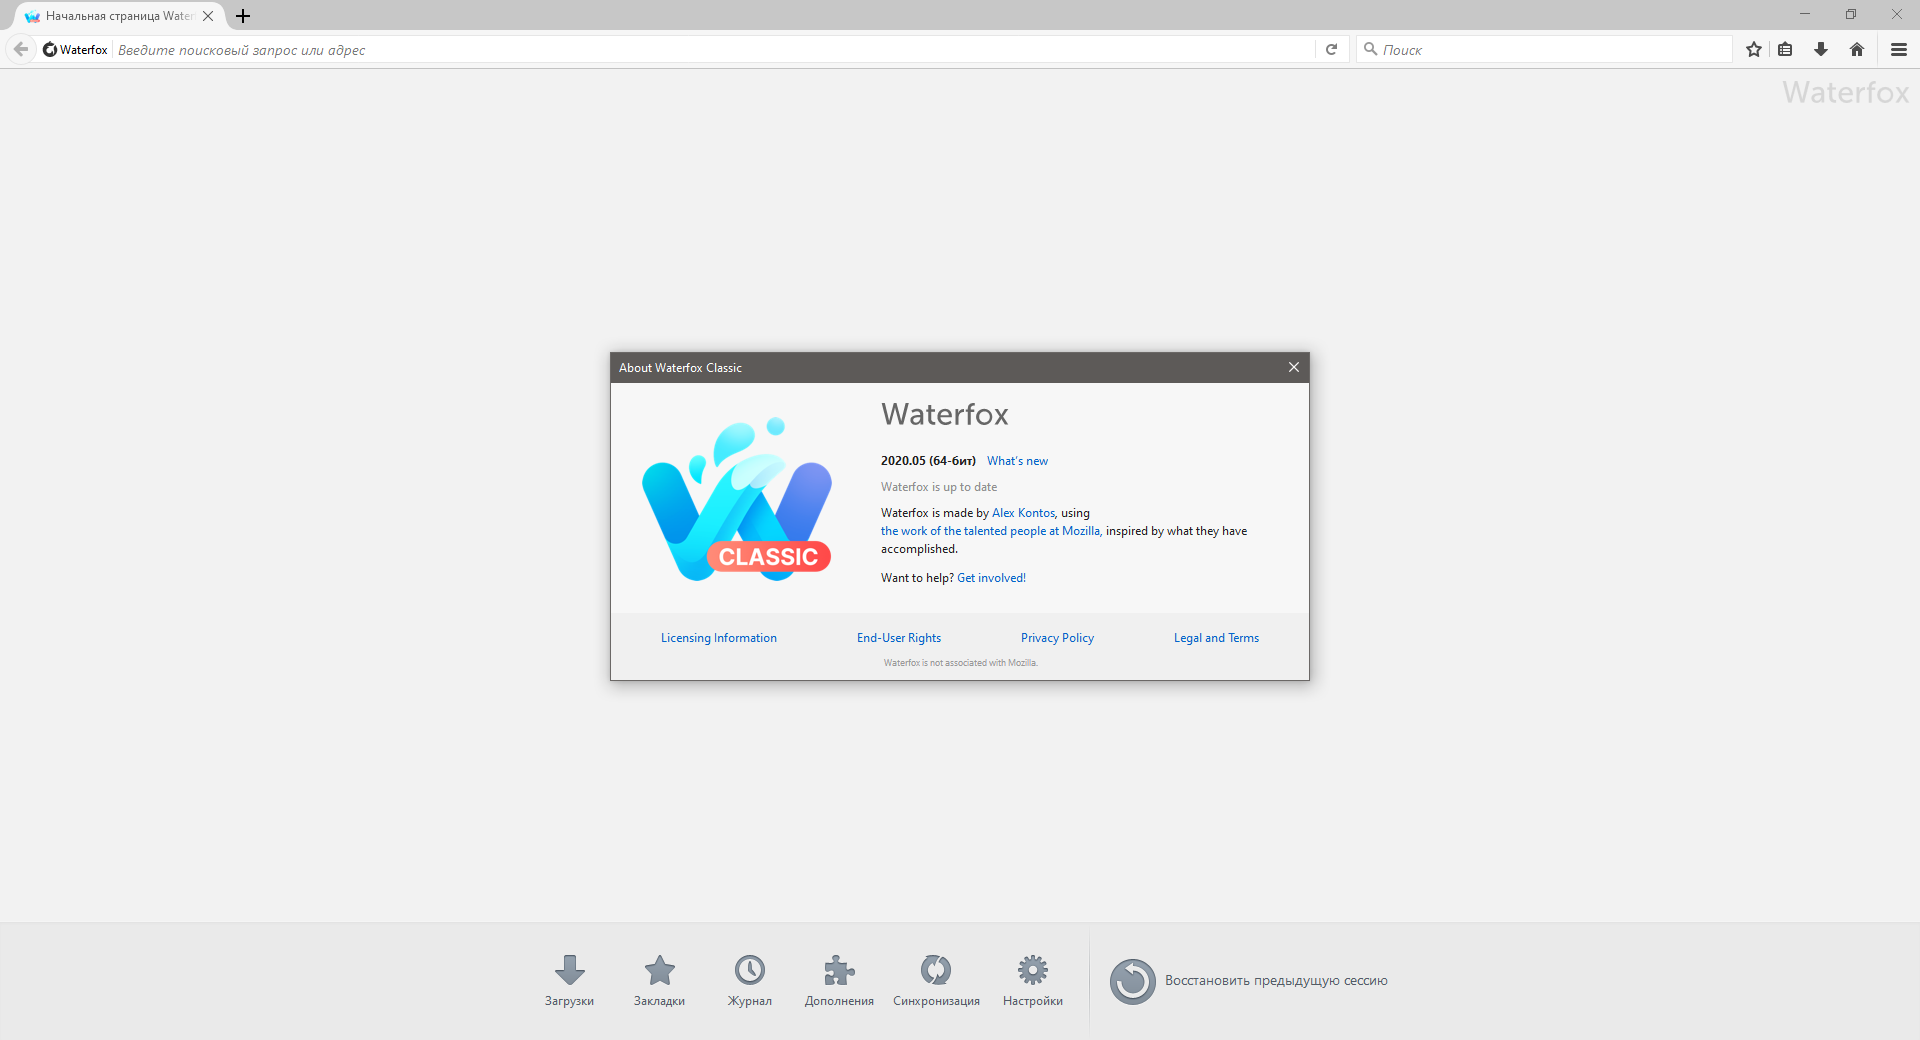 Waterfox Current G5.1.9 download the new version